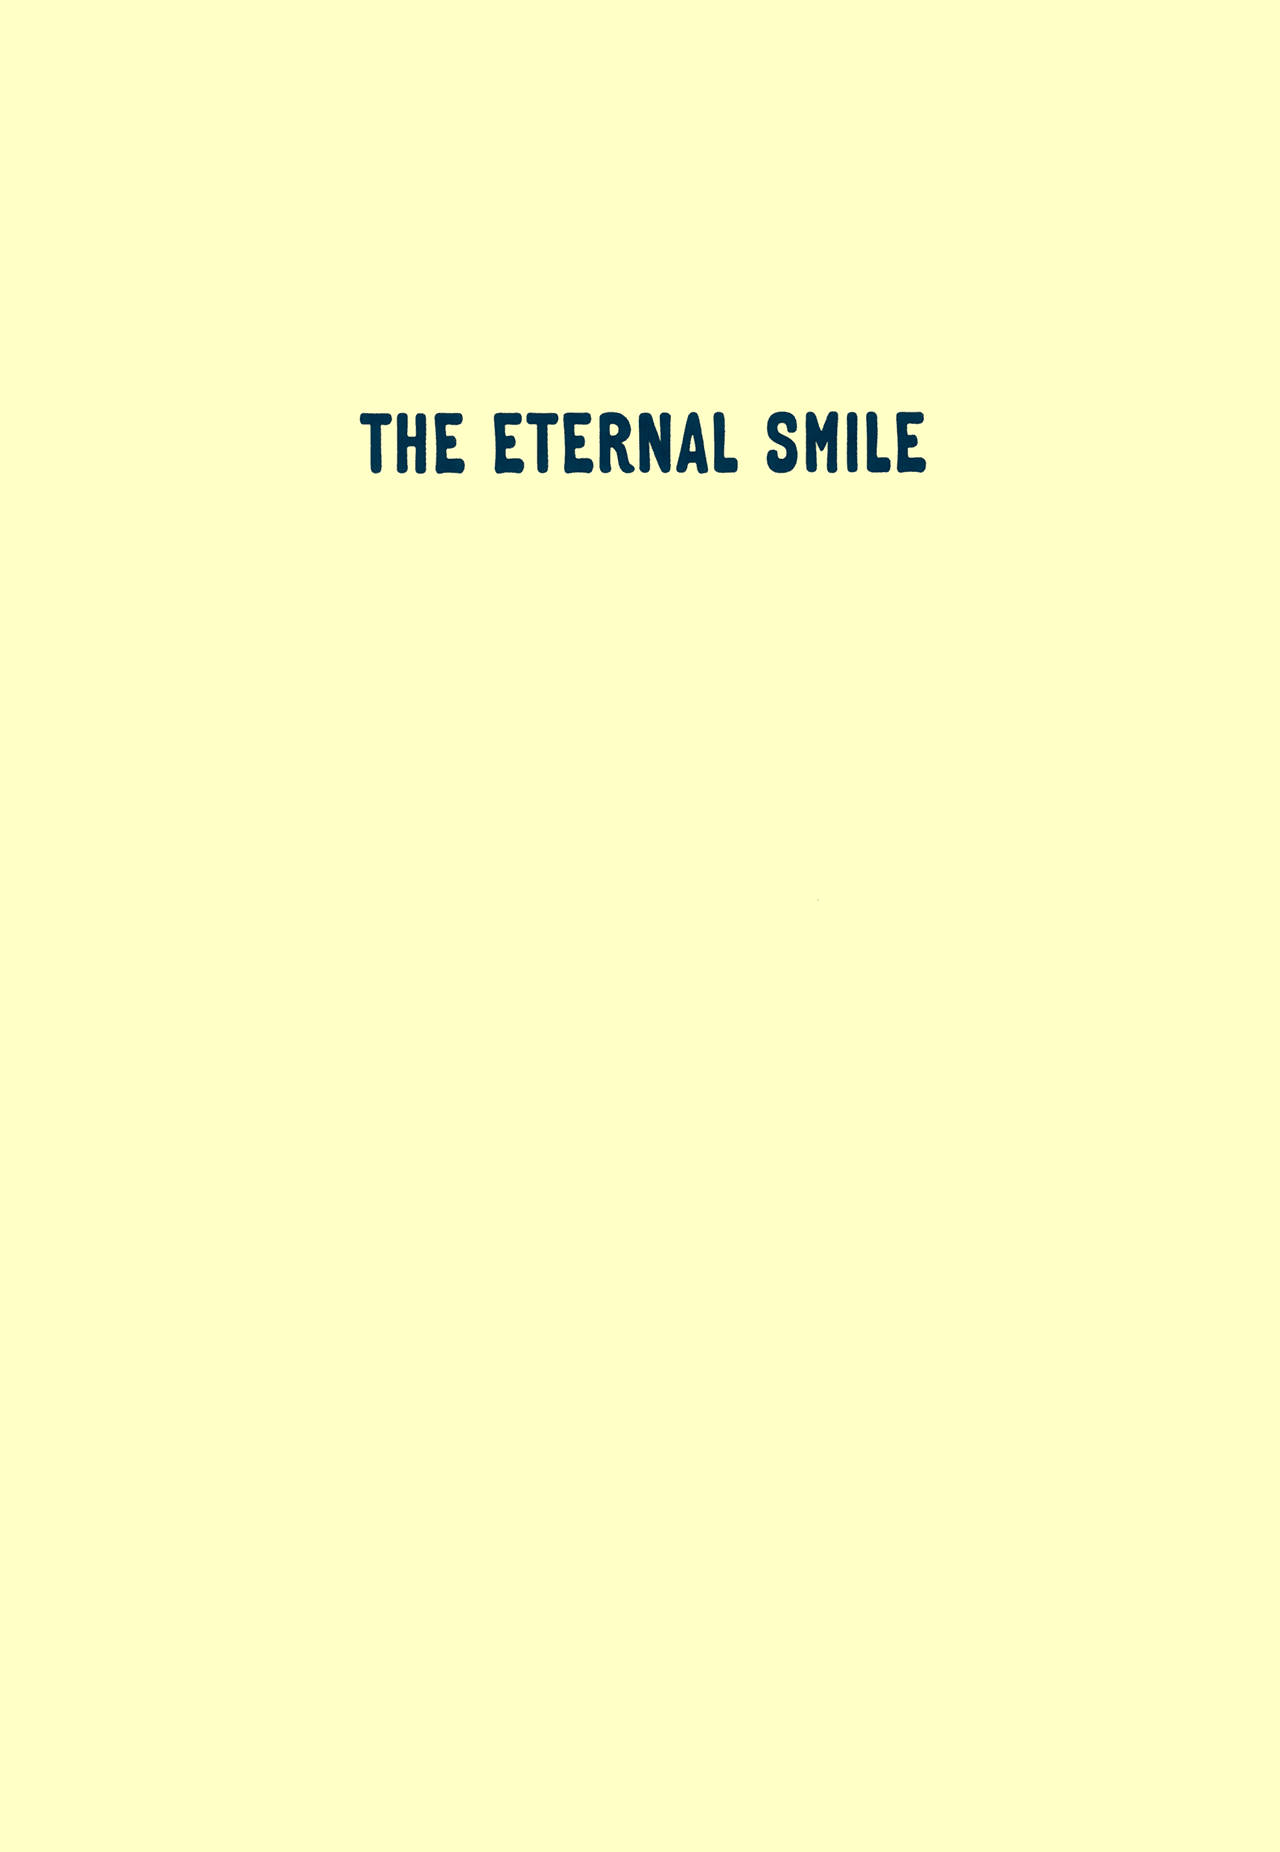 Read online The Eternal Smile comic -  Issue # TPB (Part 1) - 2